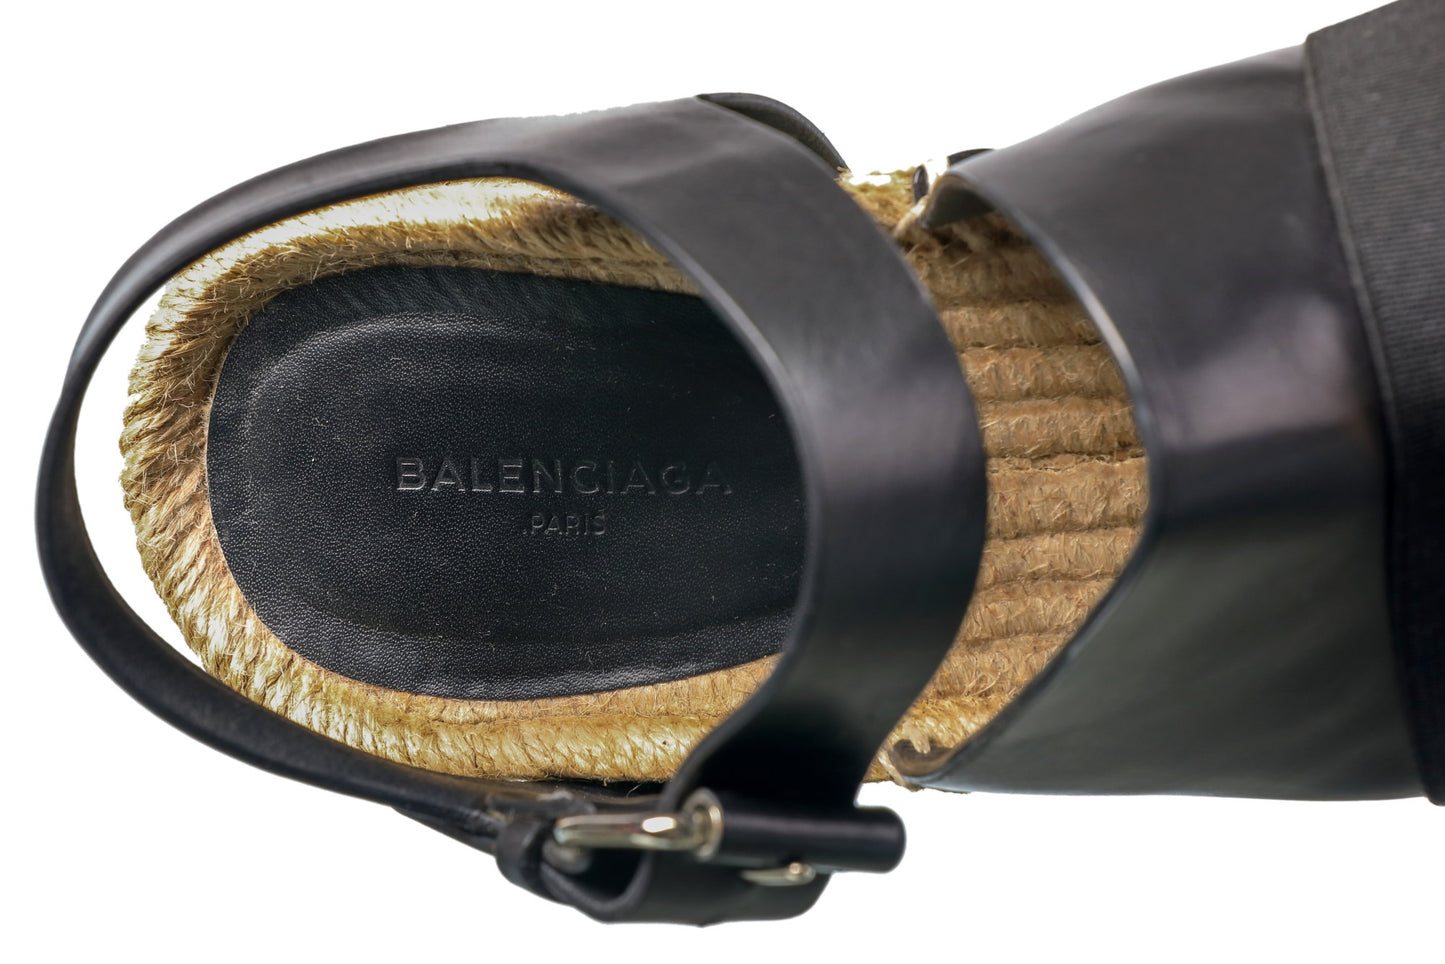 Balenciaga rope and leather sandals